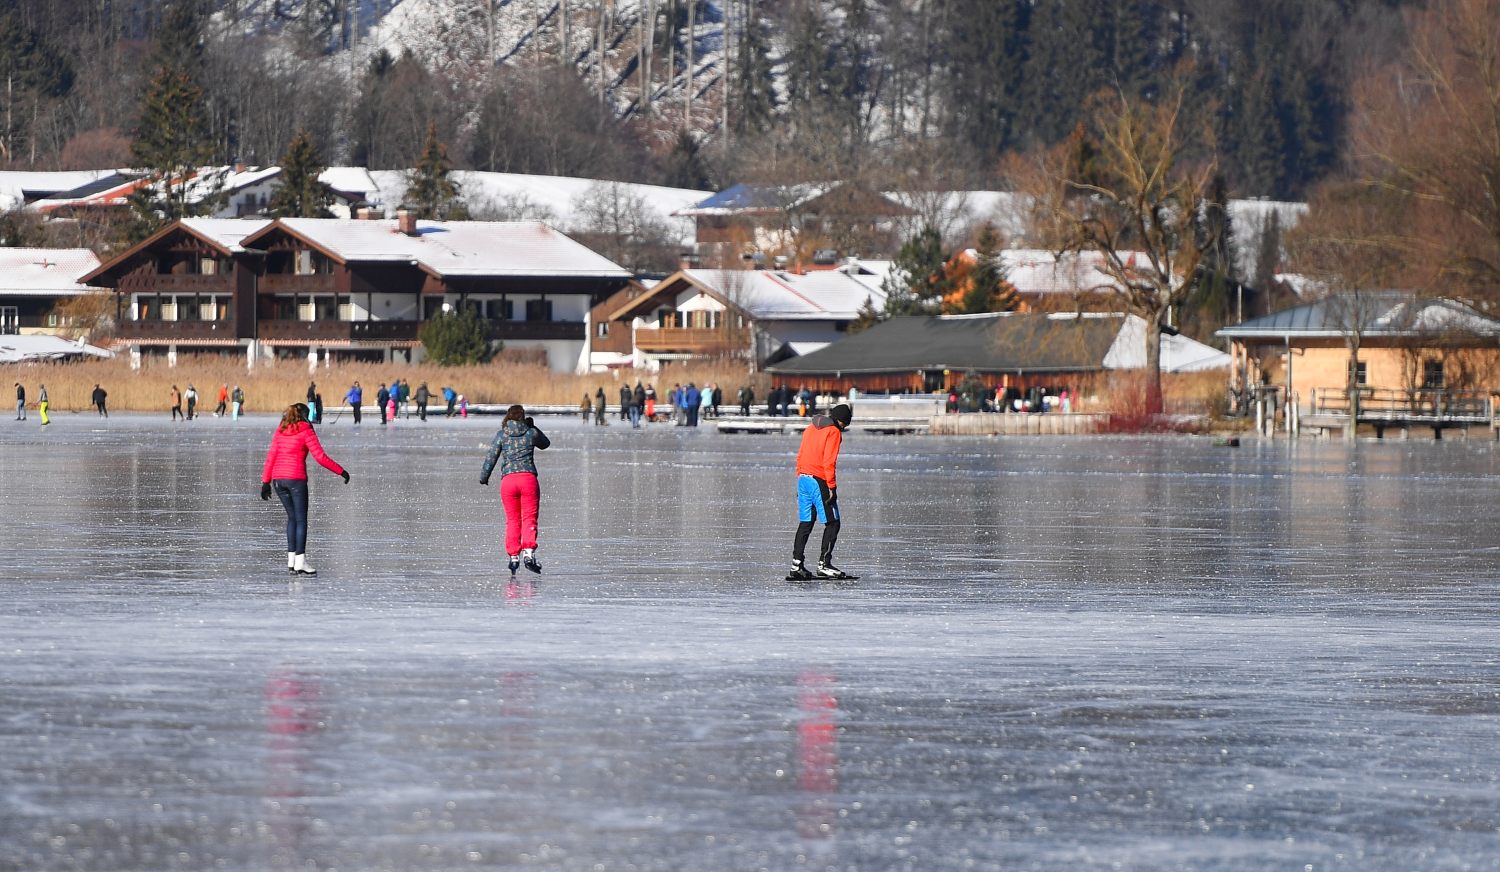 IN PICTURES: Germany embraces cold snap amid warnings over icy waterways